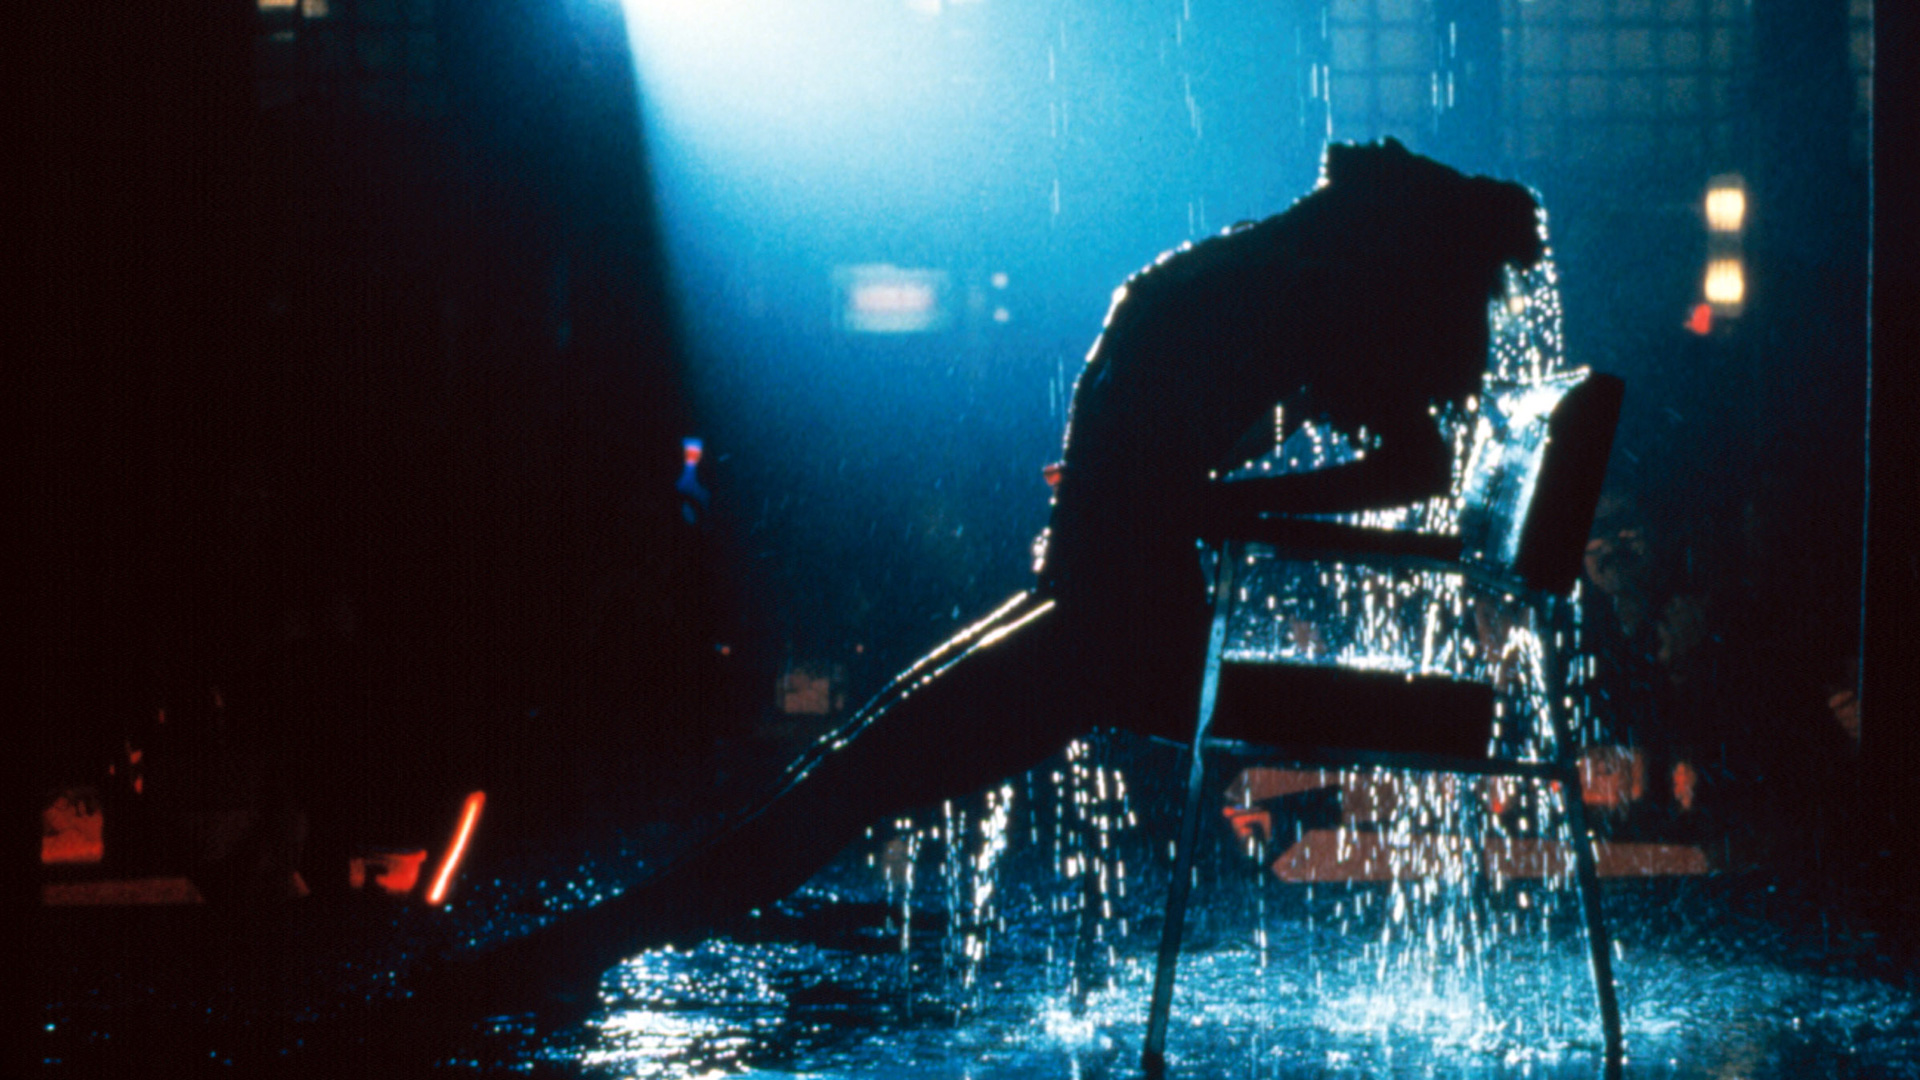 April 1983: Flashdance Was Released, Forever Changing Film, Fashion and Female Archetypes